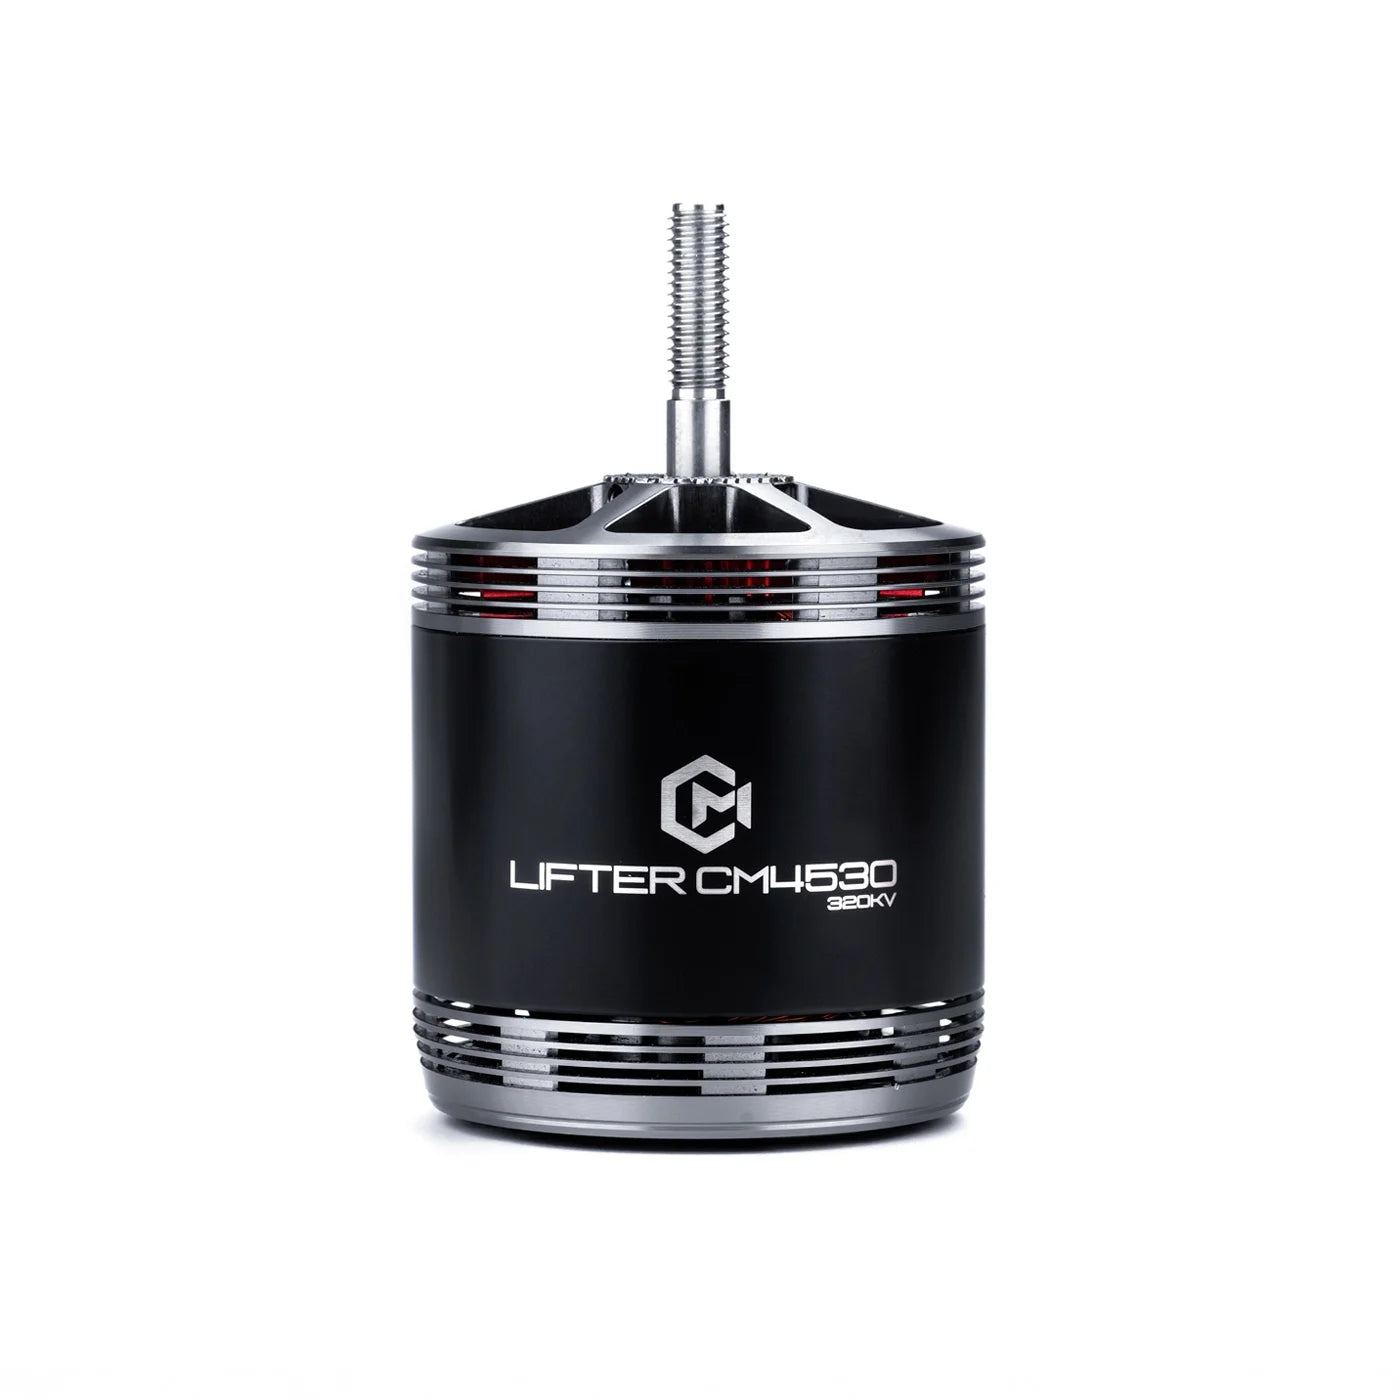 MAD CM 4530 LIFTER FPV Drone Motor - 12S 380KV 13.1kgf Brushless Motor Suitable For 13-15 inch Three-blade prop long range FPV RACING Cinelifter drone